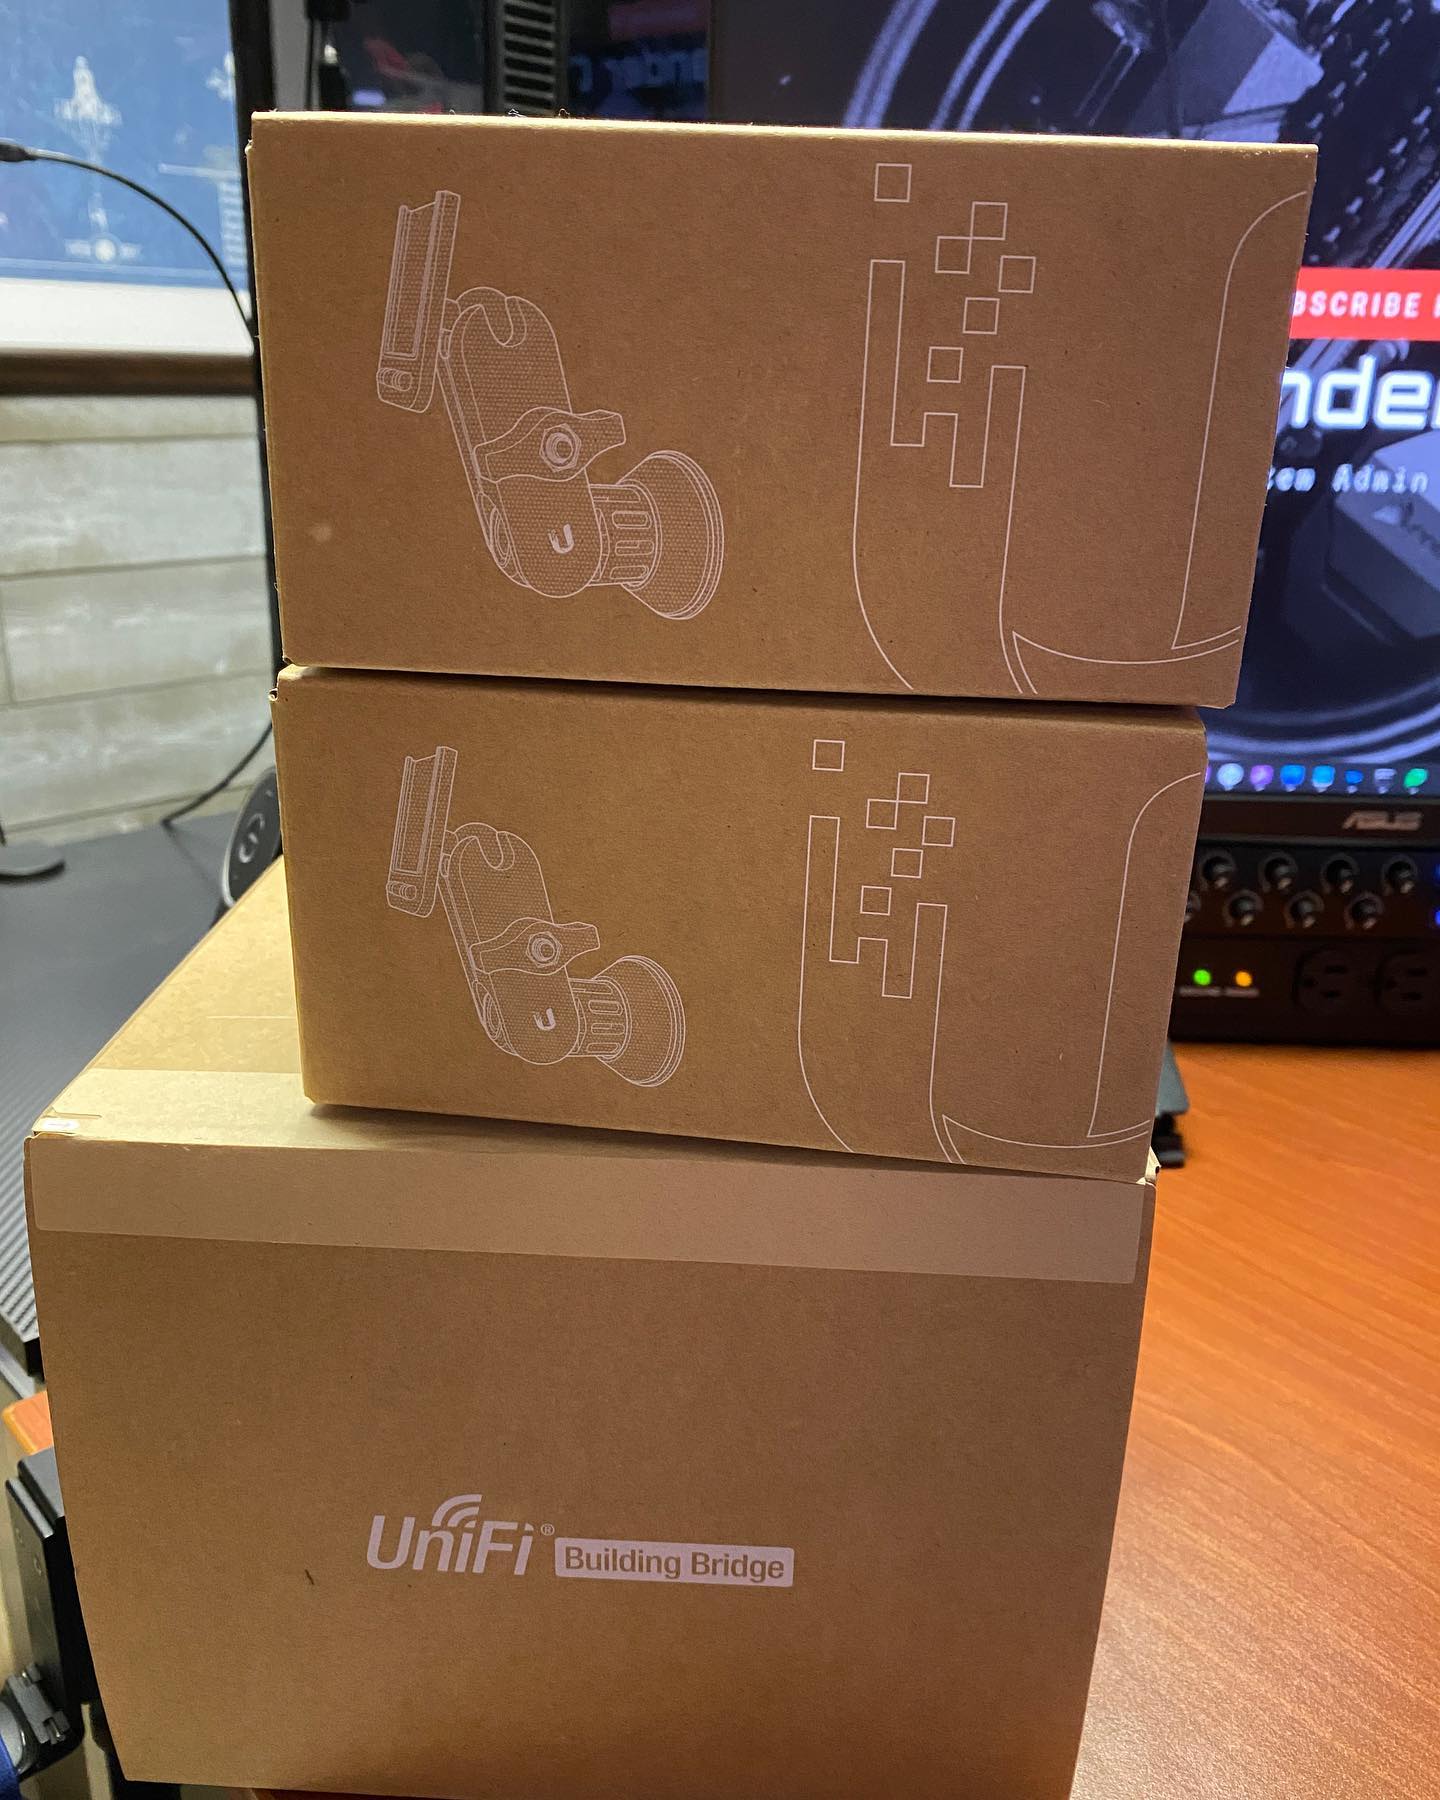 Picked up a set of Ubiquiti’s building to building bridges for my UniFi system. I have been looking to pick these up for a while. B and H photo finally had some in stock recently. #unifi #ubiquiti #bhphoto #achsysadmin #ach_sysadmin #networking #ubnt #unifinetwork